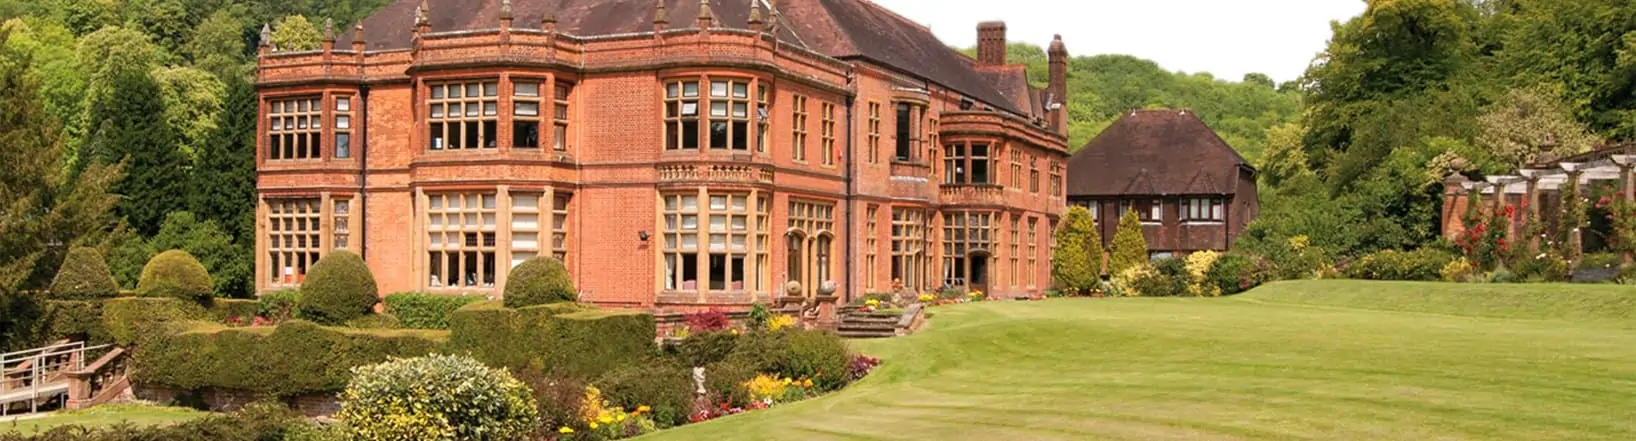 WOLDINGHAM SCHOOL (DISCOVERY SUMMER)